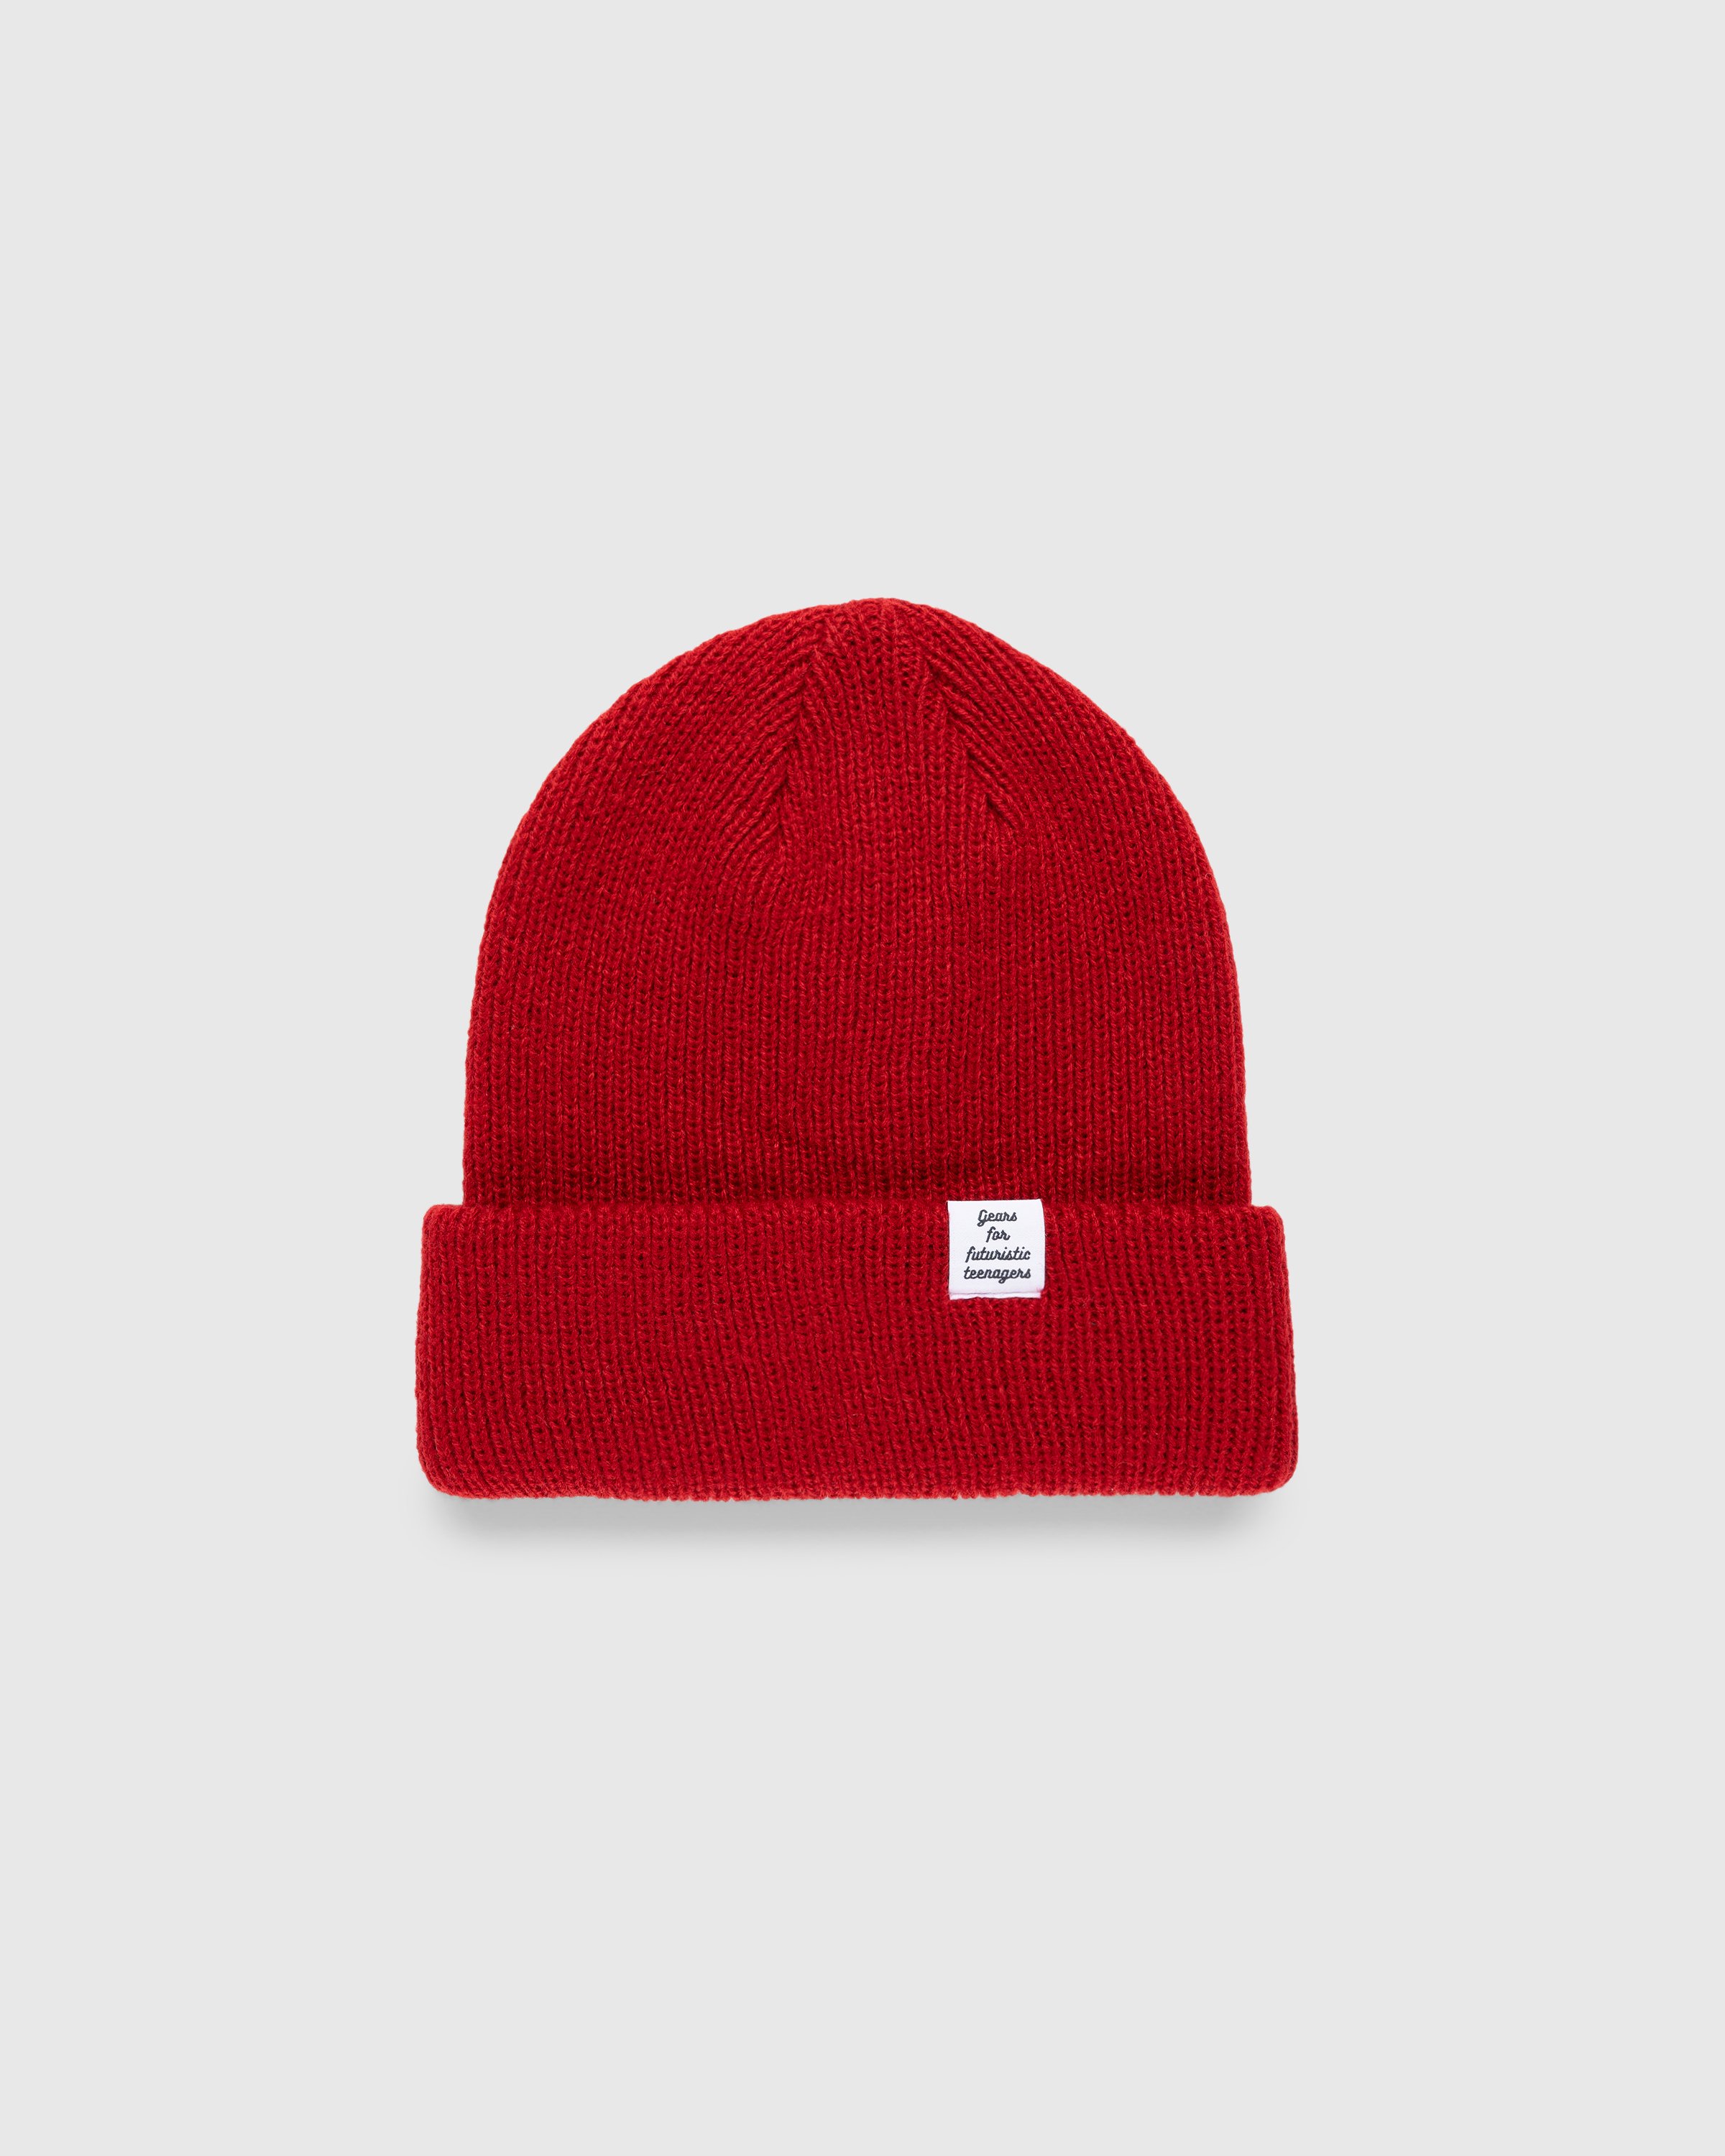 Human Made – Classic Beanie Red | Highsnobiety Shop